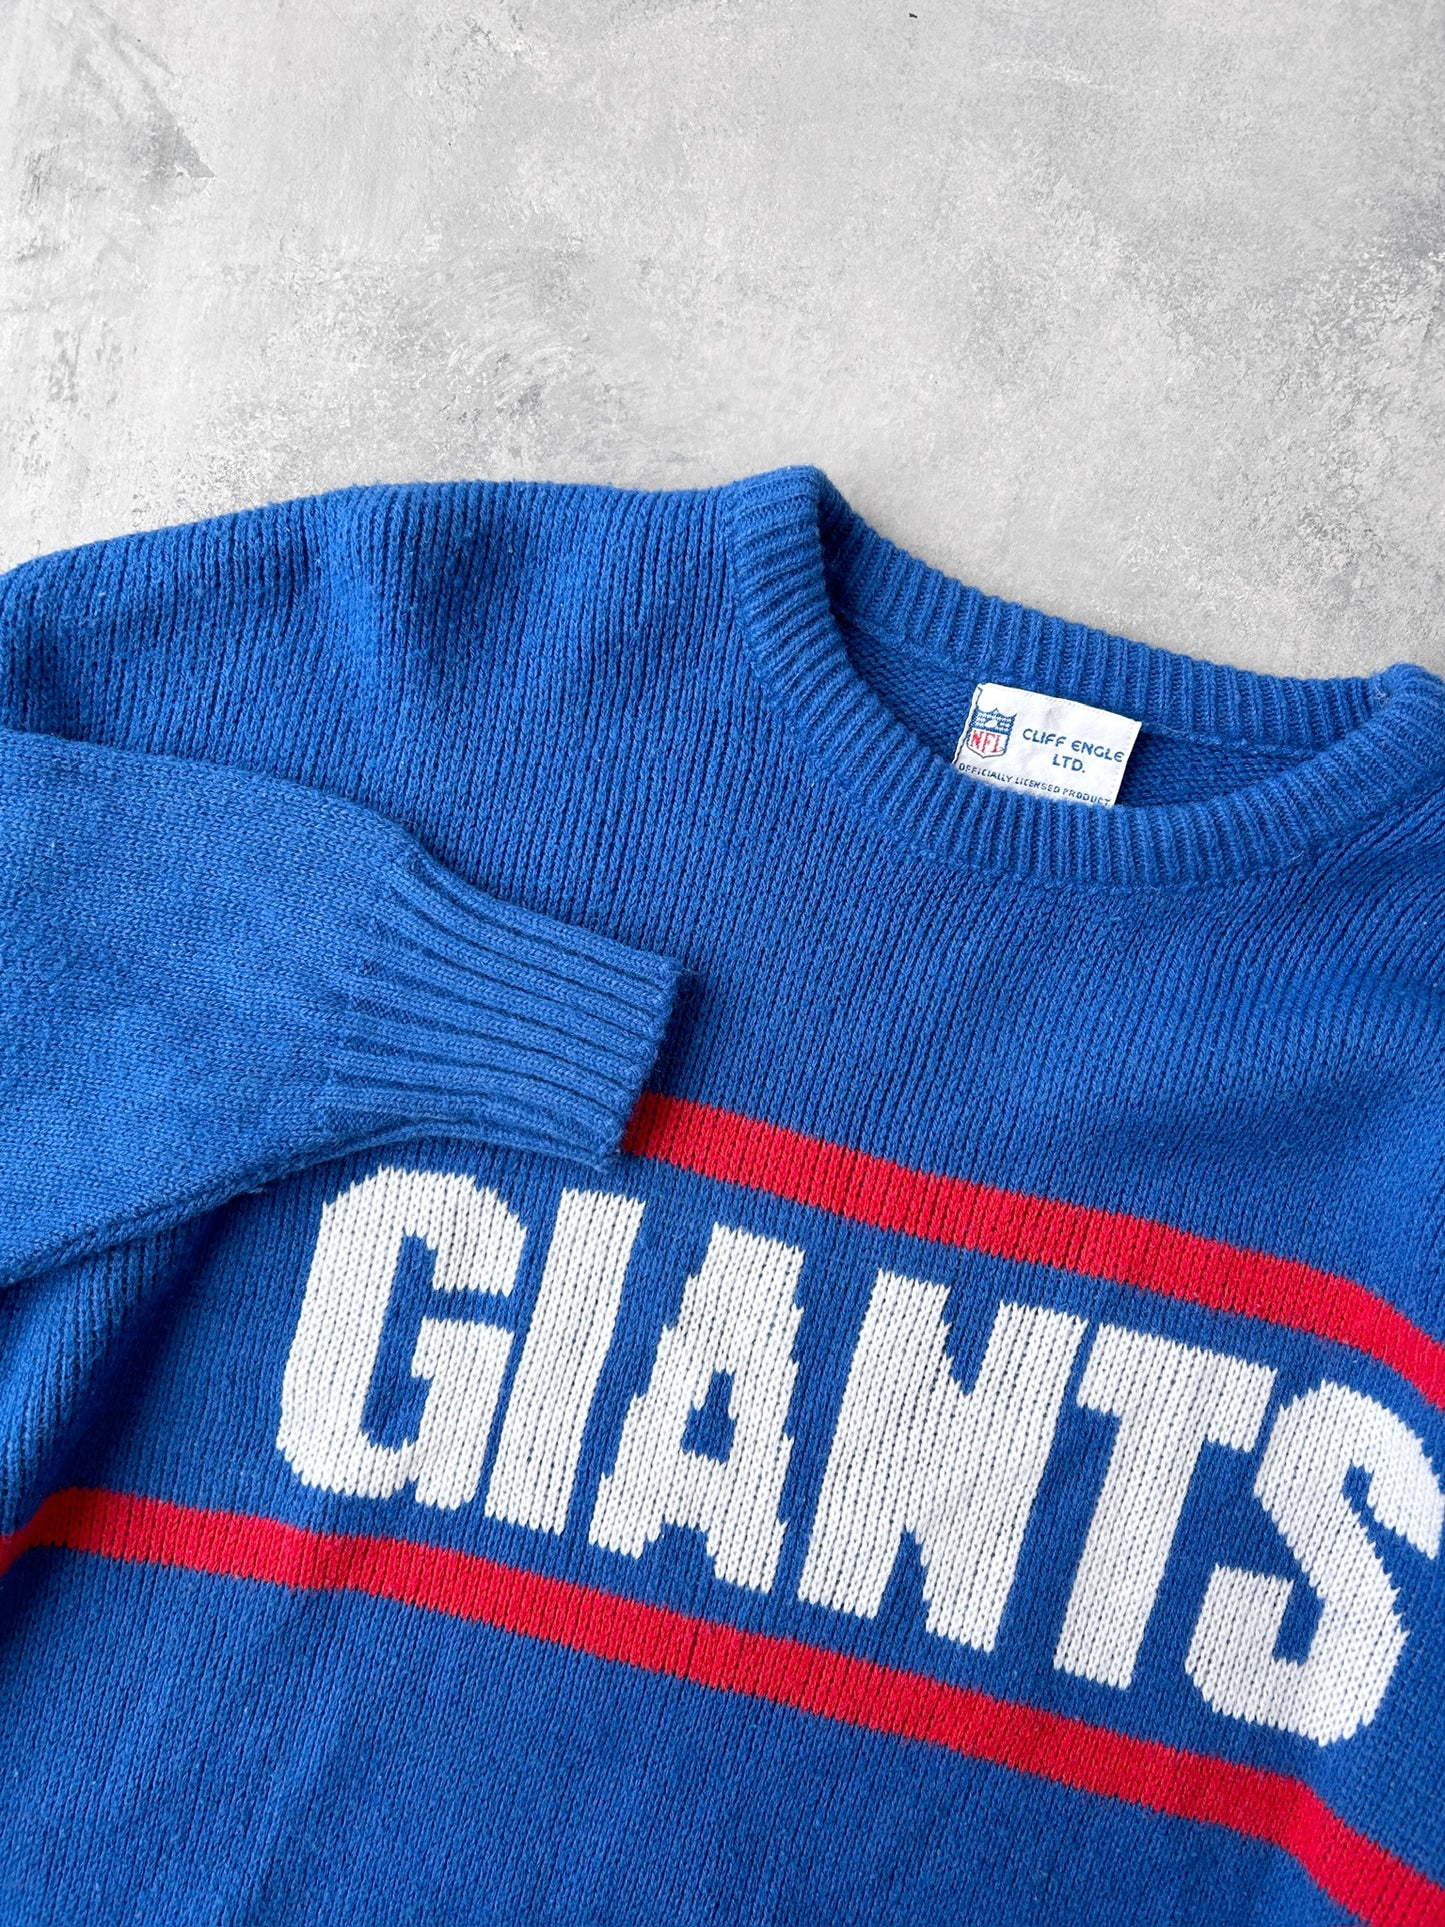 New York Giants Sweater 90's - Large